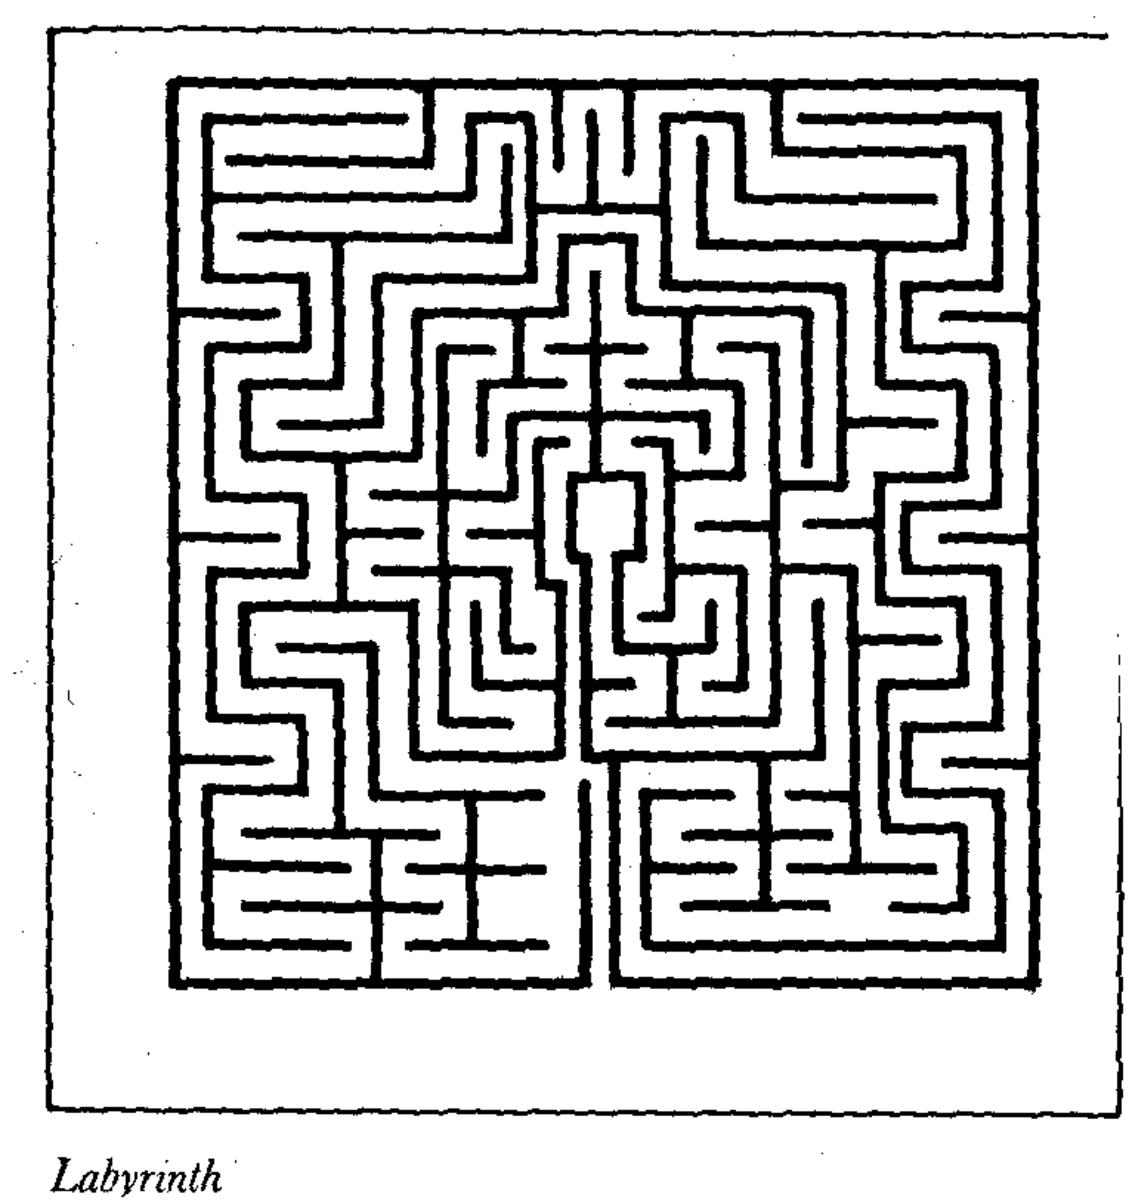 Although the most usual pattern of labyrinths is round, they can also be square in shape and pattern.